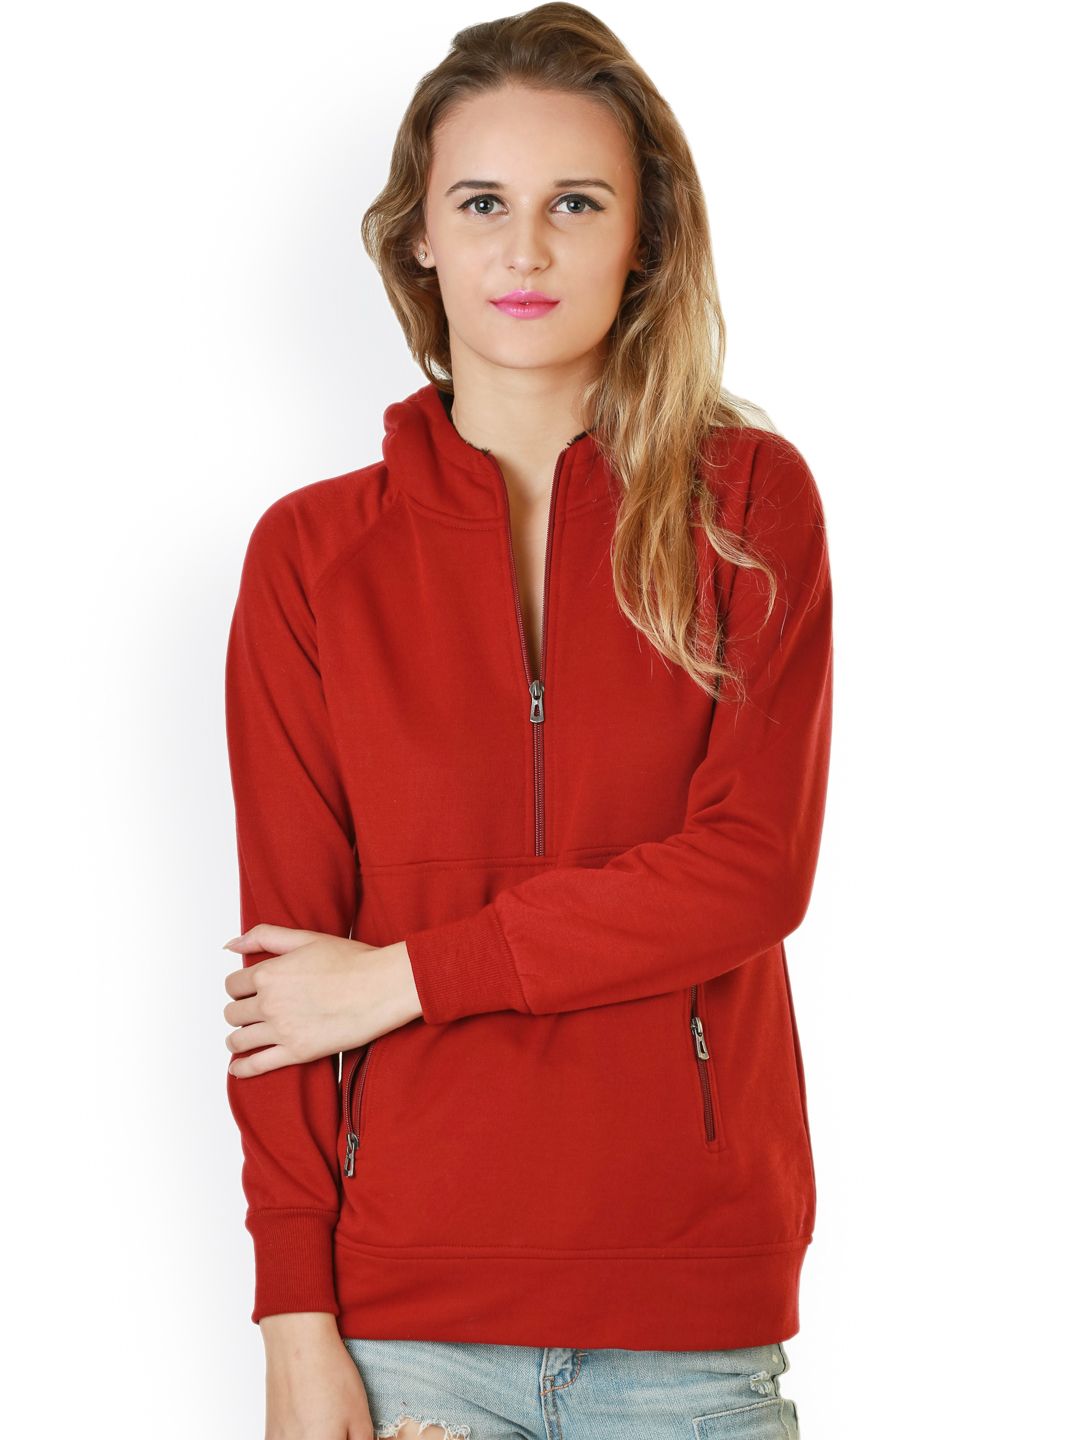 Belle Fille Red Hooded Sweatshirt Price in India